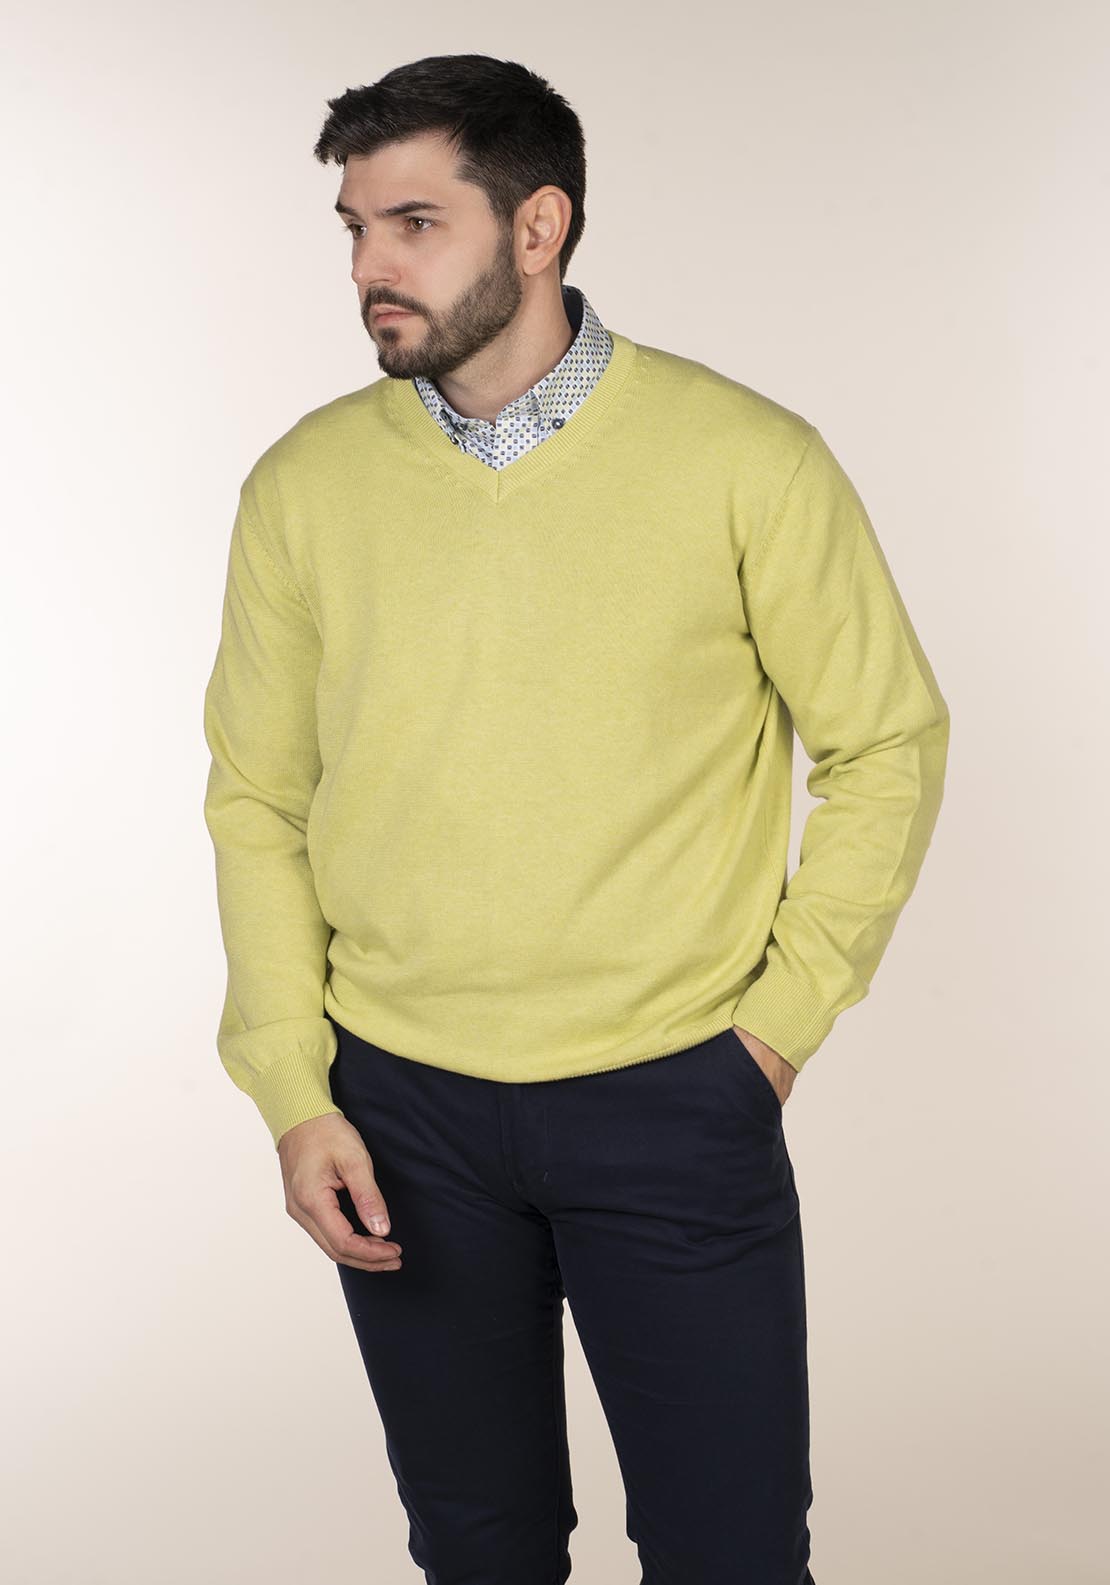 Yeats Plain Cotton V Neck Sweaters 2 Shaws Department Stores